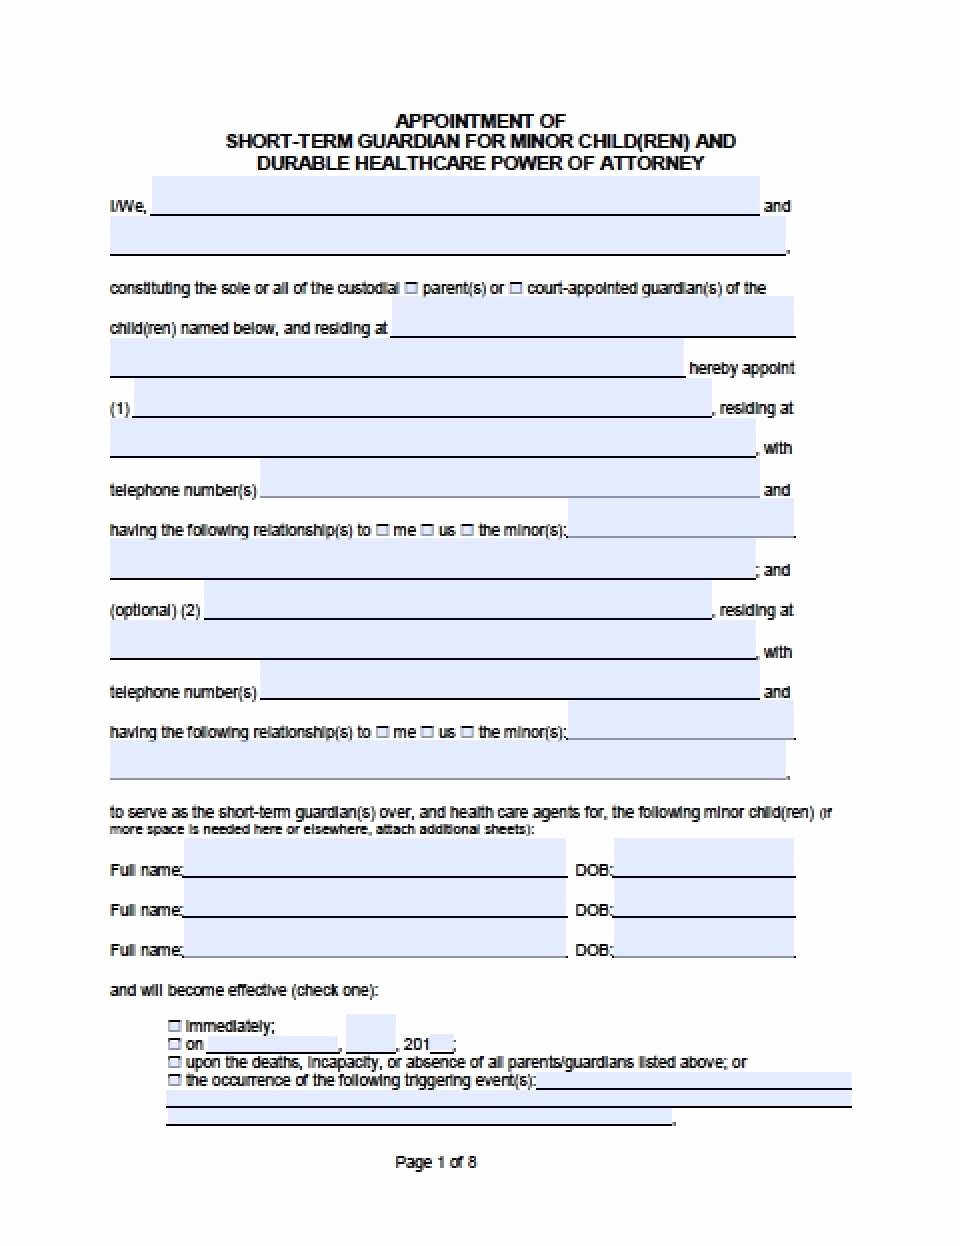 Free Temporary Guardianship form Template Fresh Temporary Guardianship Agreement form California Excellent